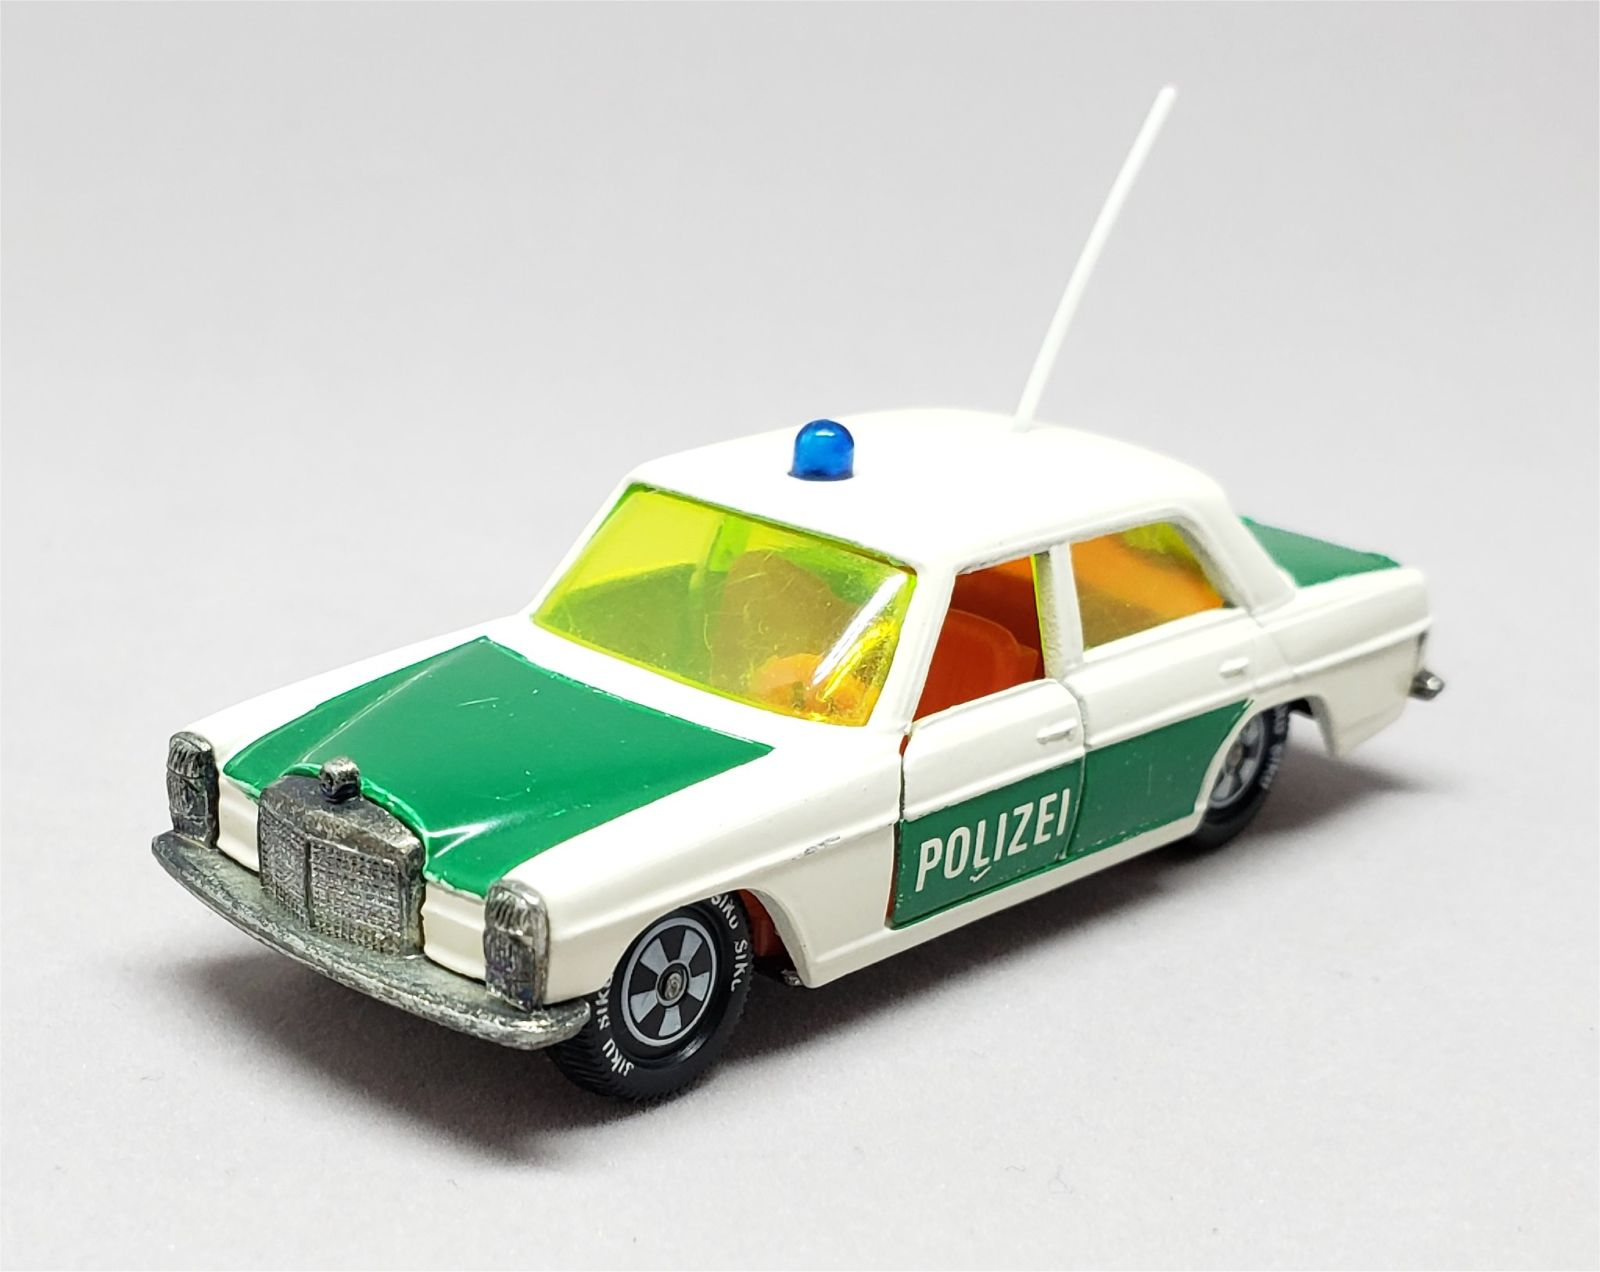 Illustration for article titled [REVIEW] Siku Mercedes-Benz 250 Polizei